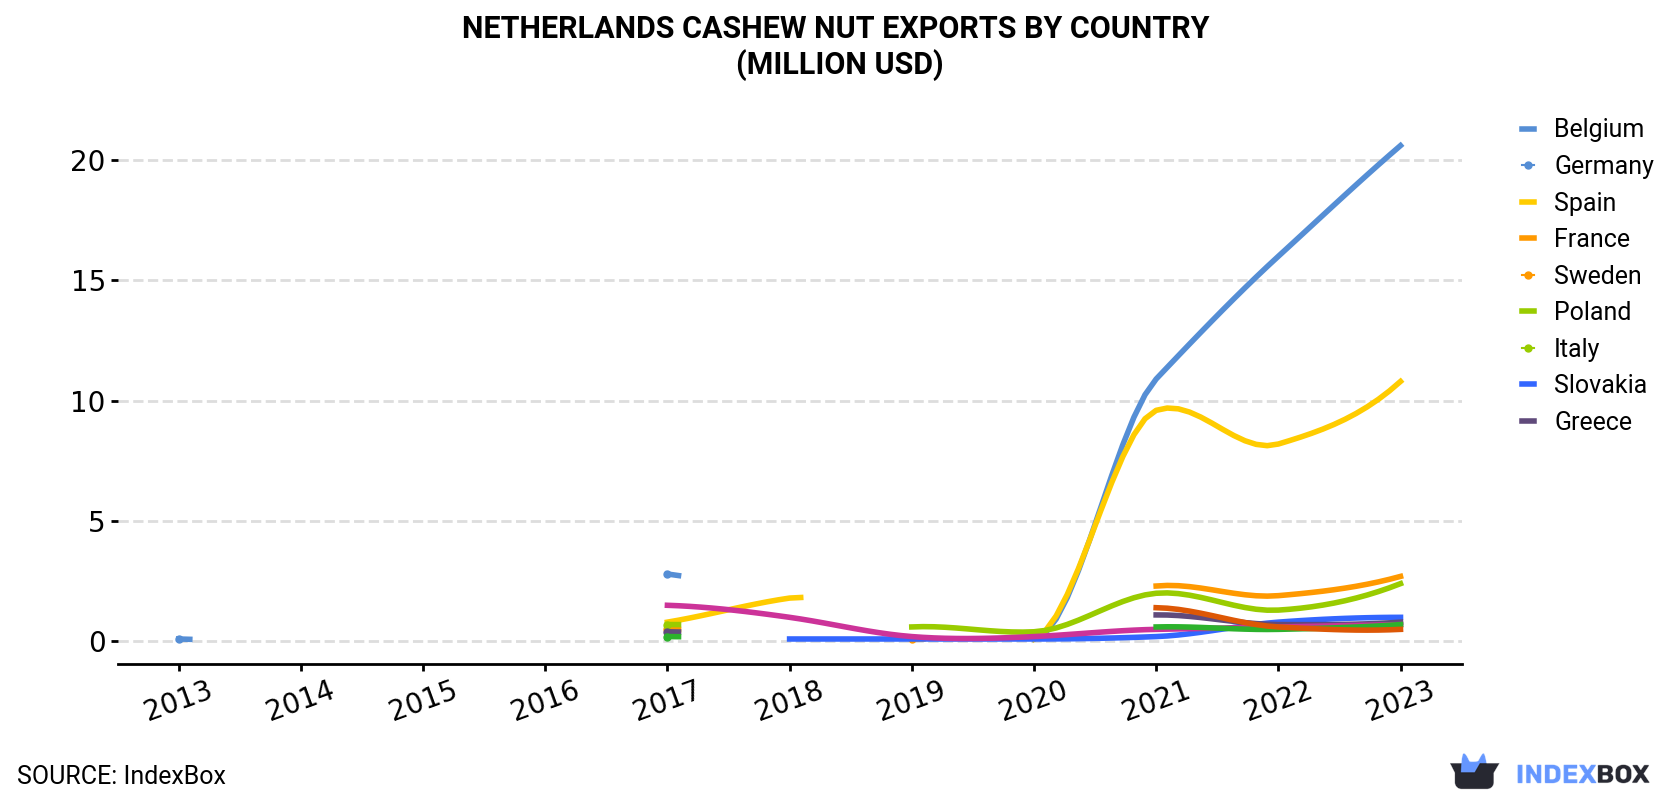 Netherlands Cashew Nut Exports By Country (Million USD)